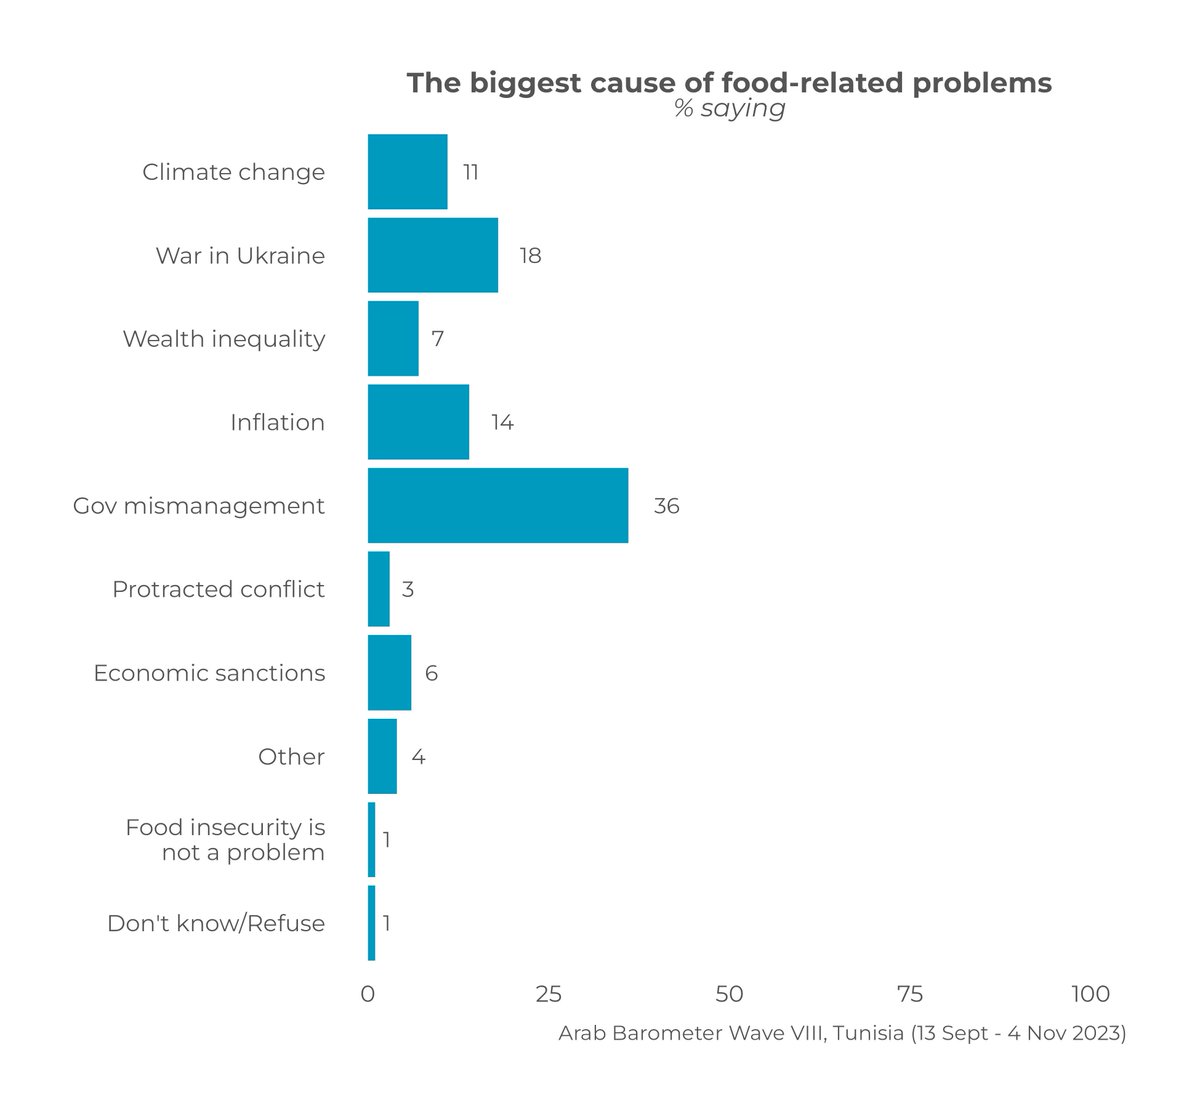 #Ramadan is a difficult time for Tunisians in light of #Tunisia's economic crises, especially w/ their increasing concerns regarding #food_security. 2/3 of Tunisians say they've gone w/out food at least once in the previous month & attribute food insecurity to gov. mismanagement